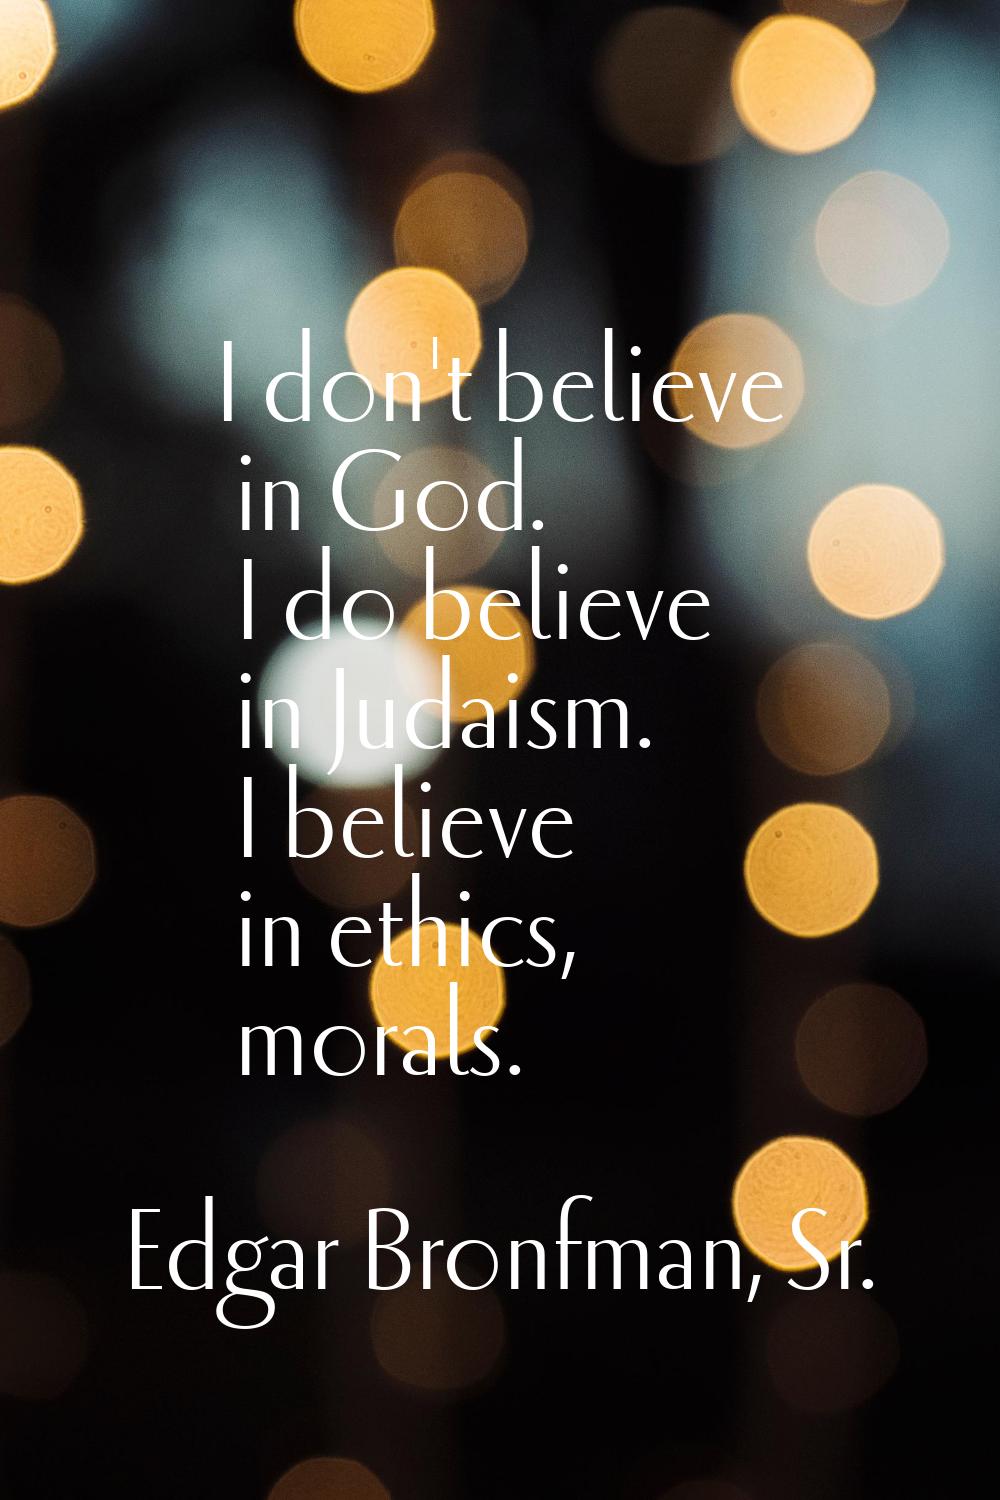 I don't believe in God. I do believe in Judaism. I believe in ethics, morals.